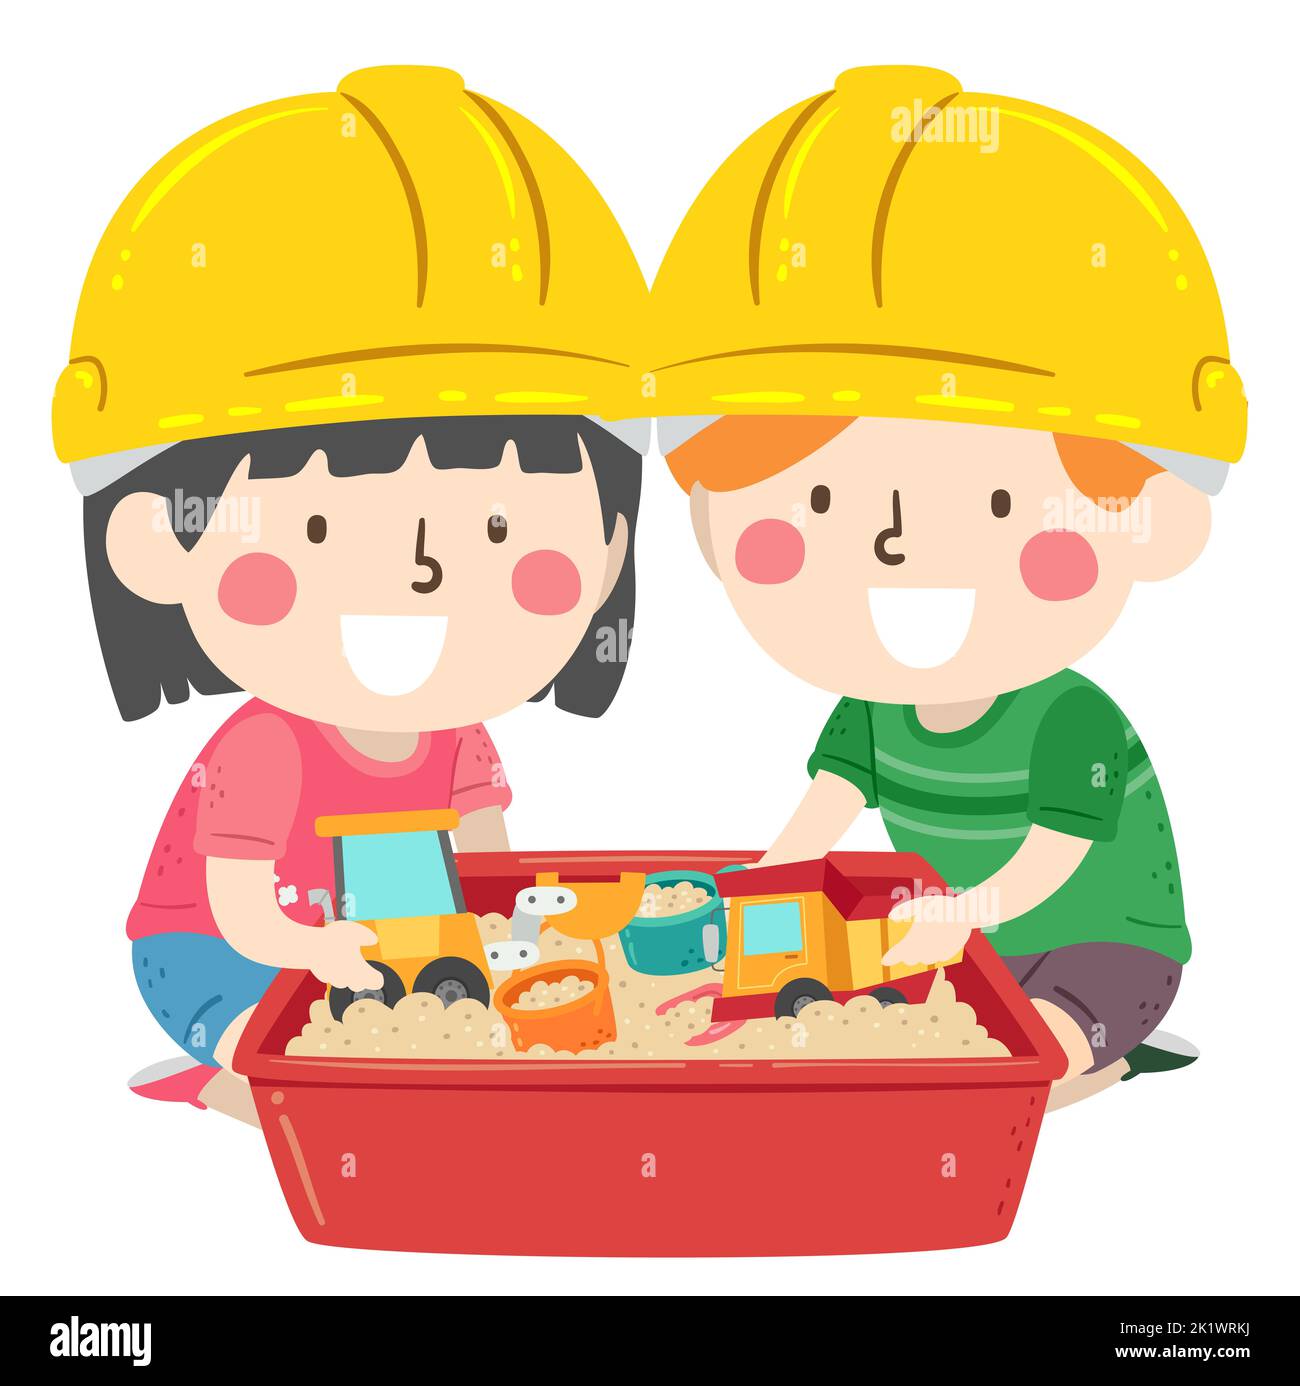 Illustration of Kids Wearing Yellow Hard Hat and Playing with Construction Toys in the Sandbox Stock Photo